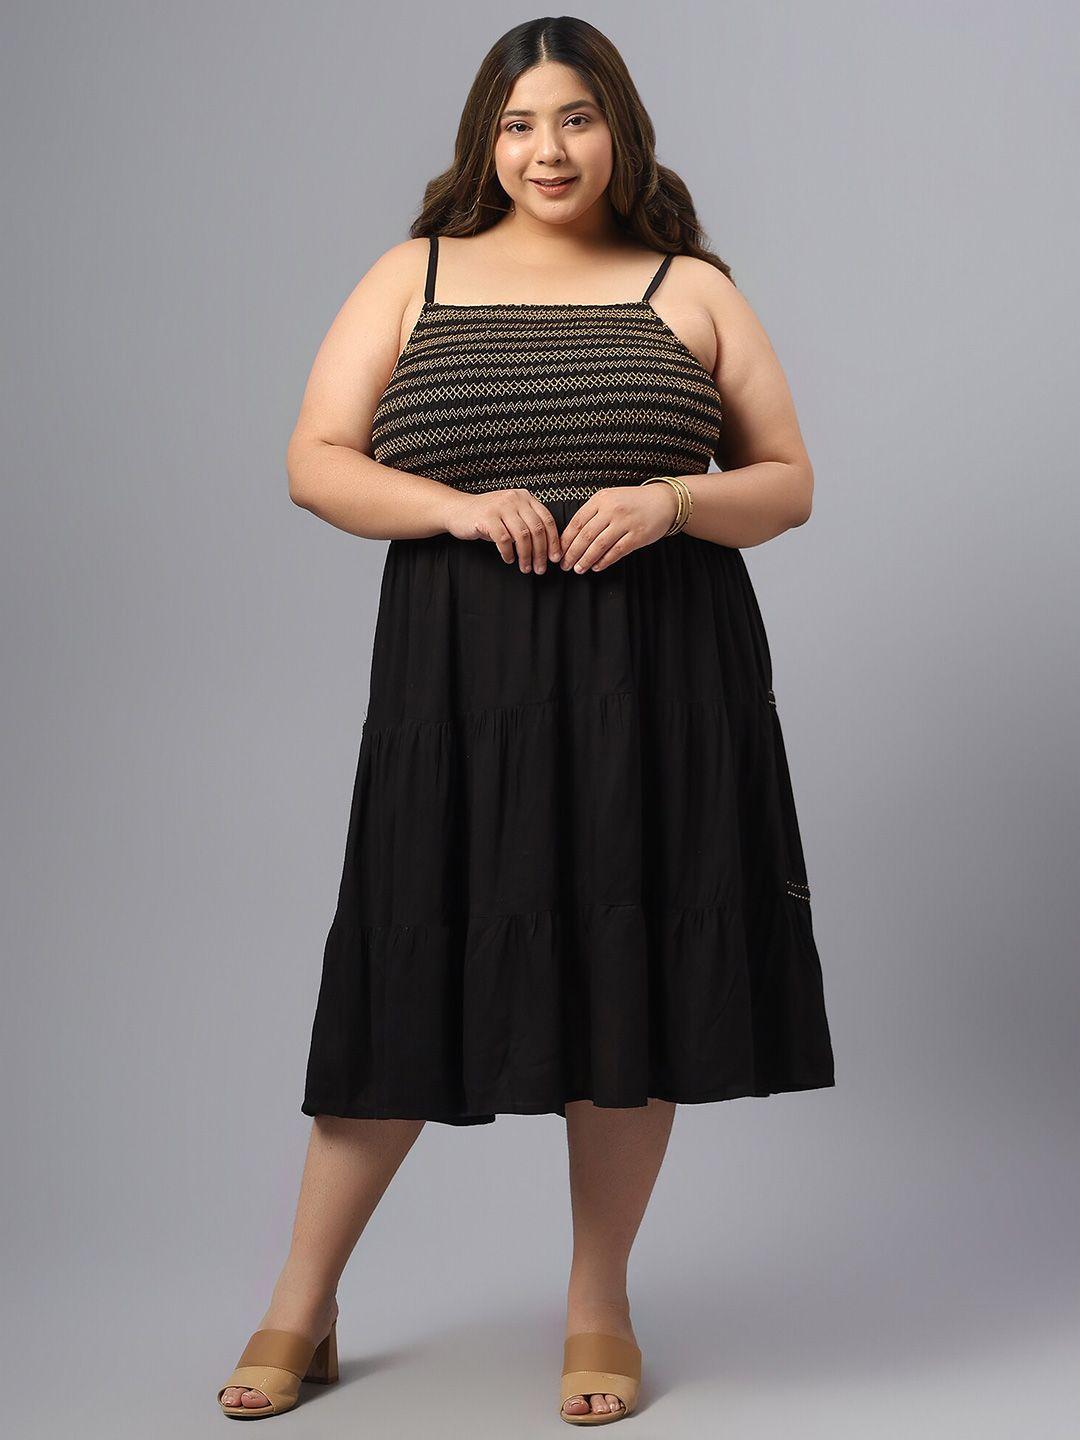 saakaa-plus-size-striped-shoulder-straps-gathered-fit-&-flare-midi-dress